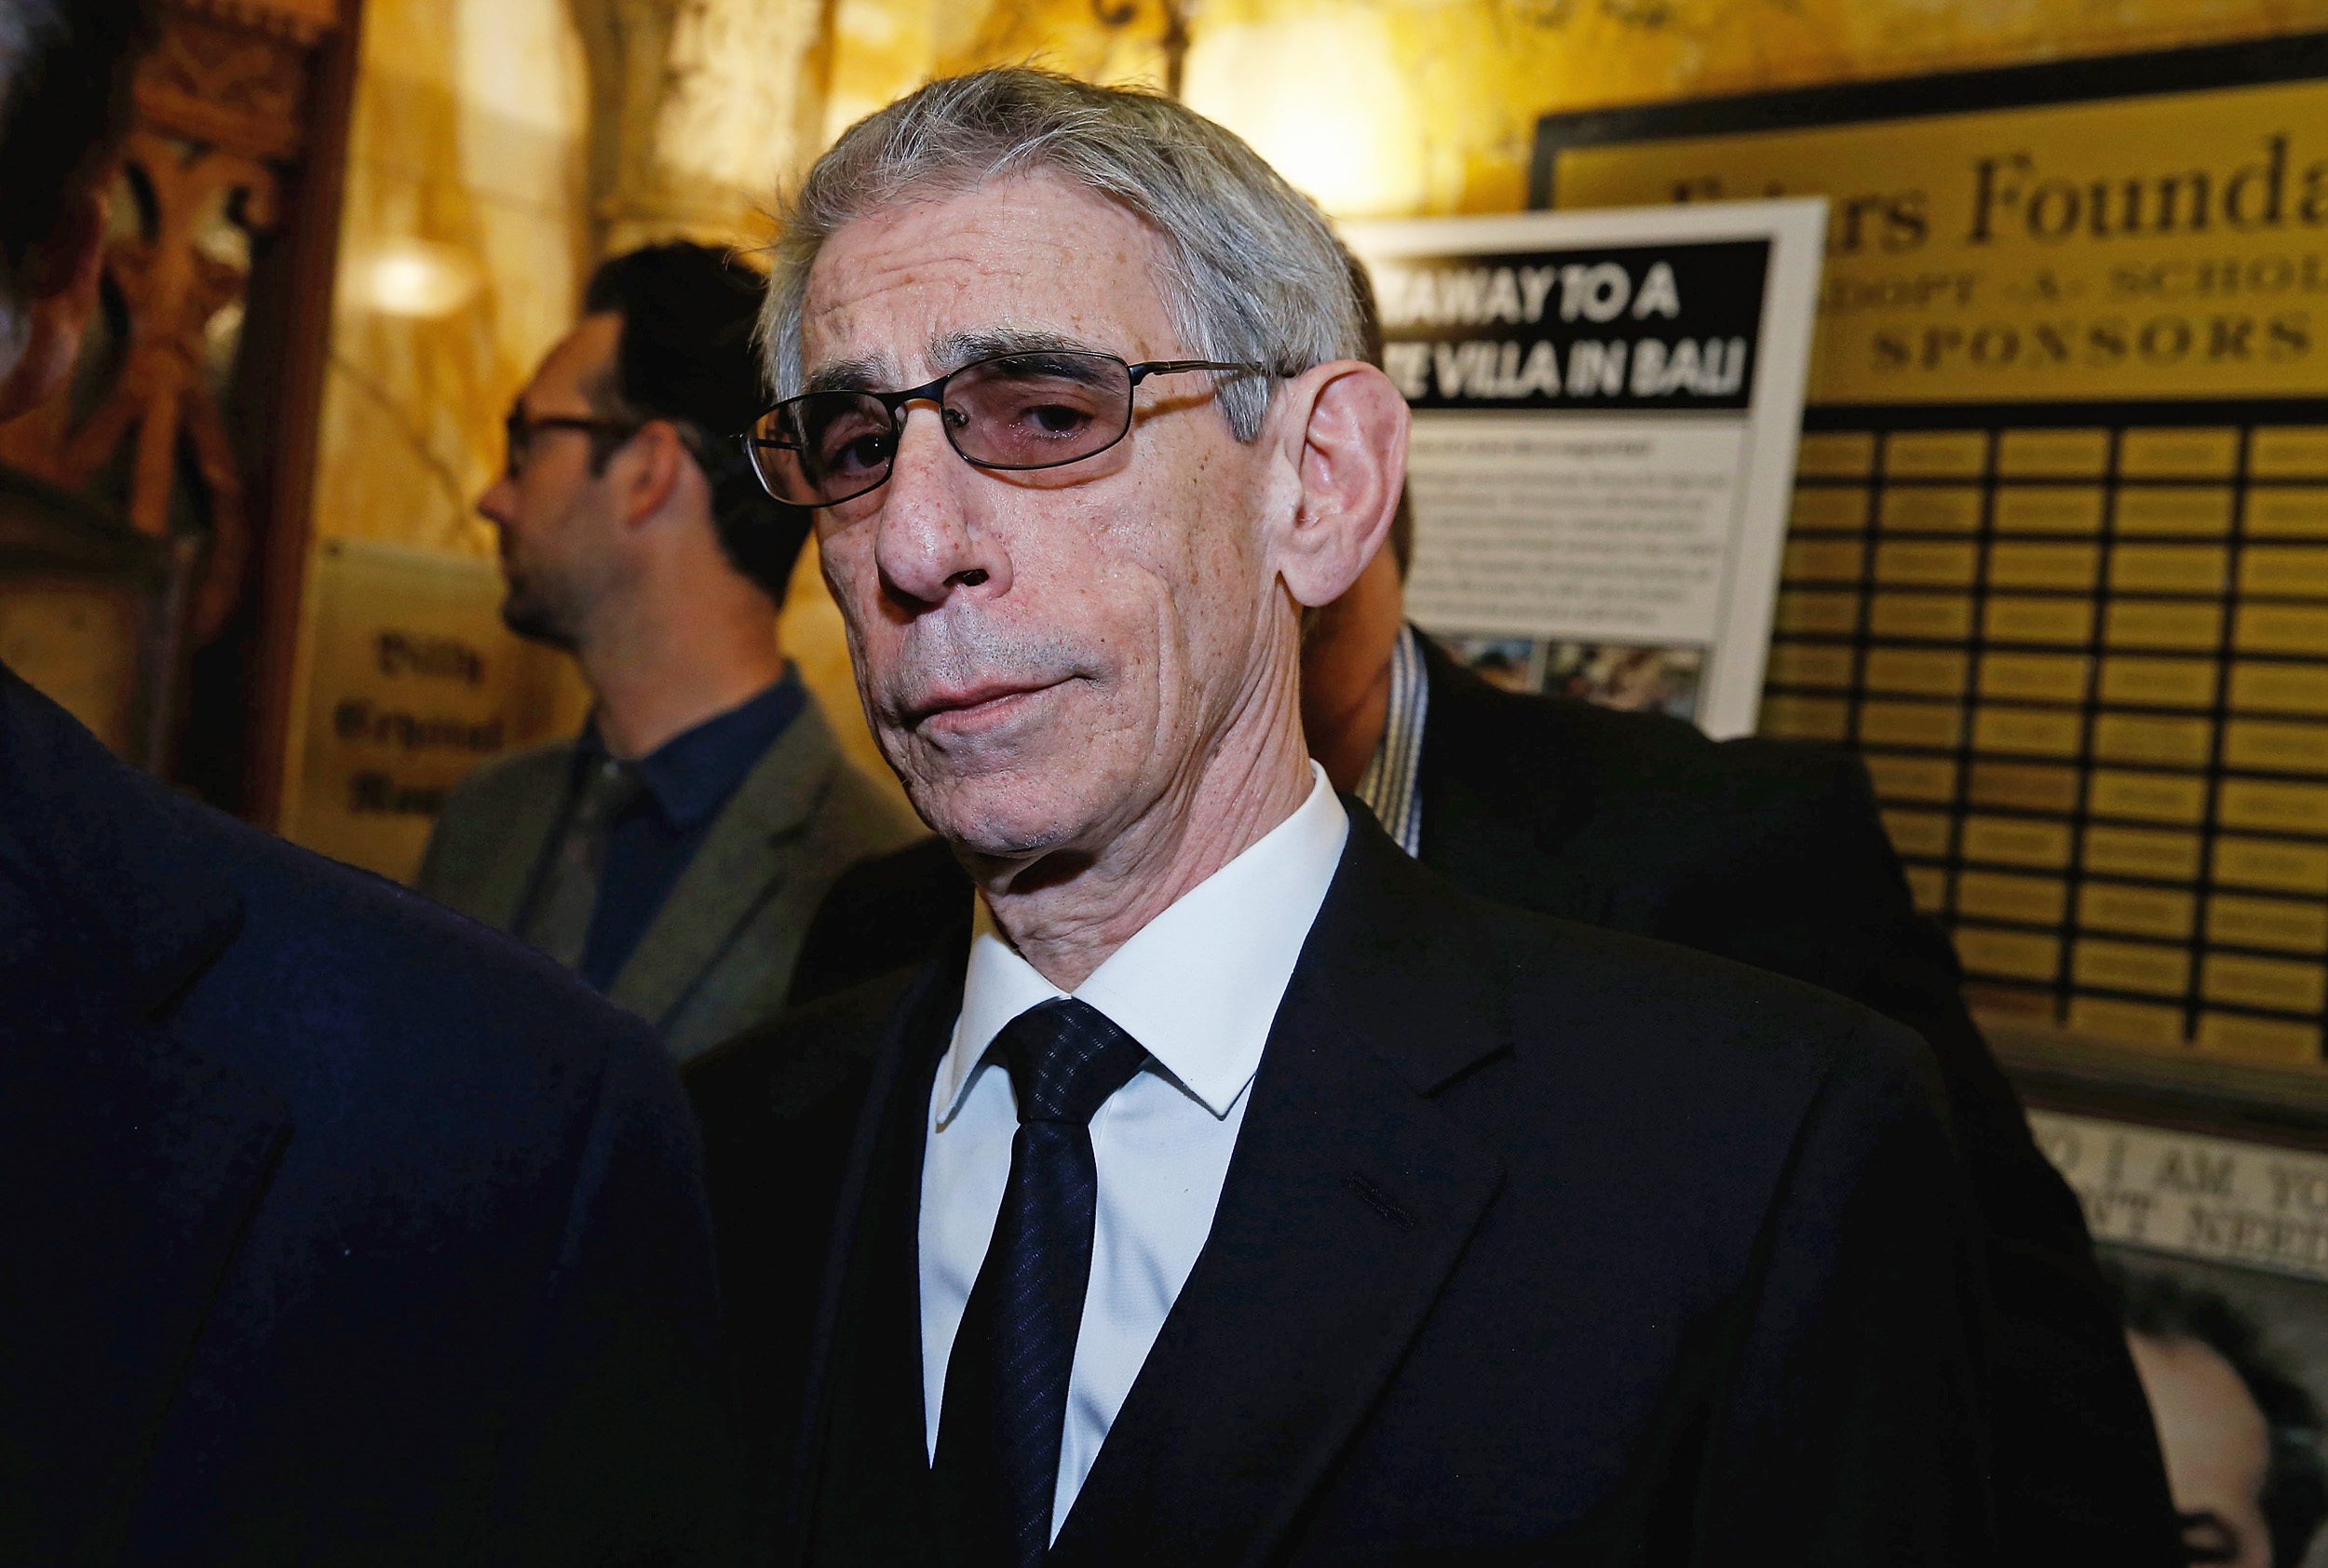 Law & Order actor Richard Belzer passed away at age 78